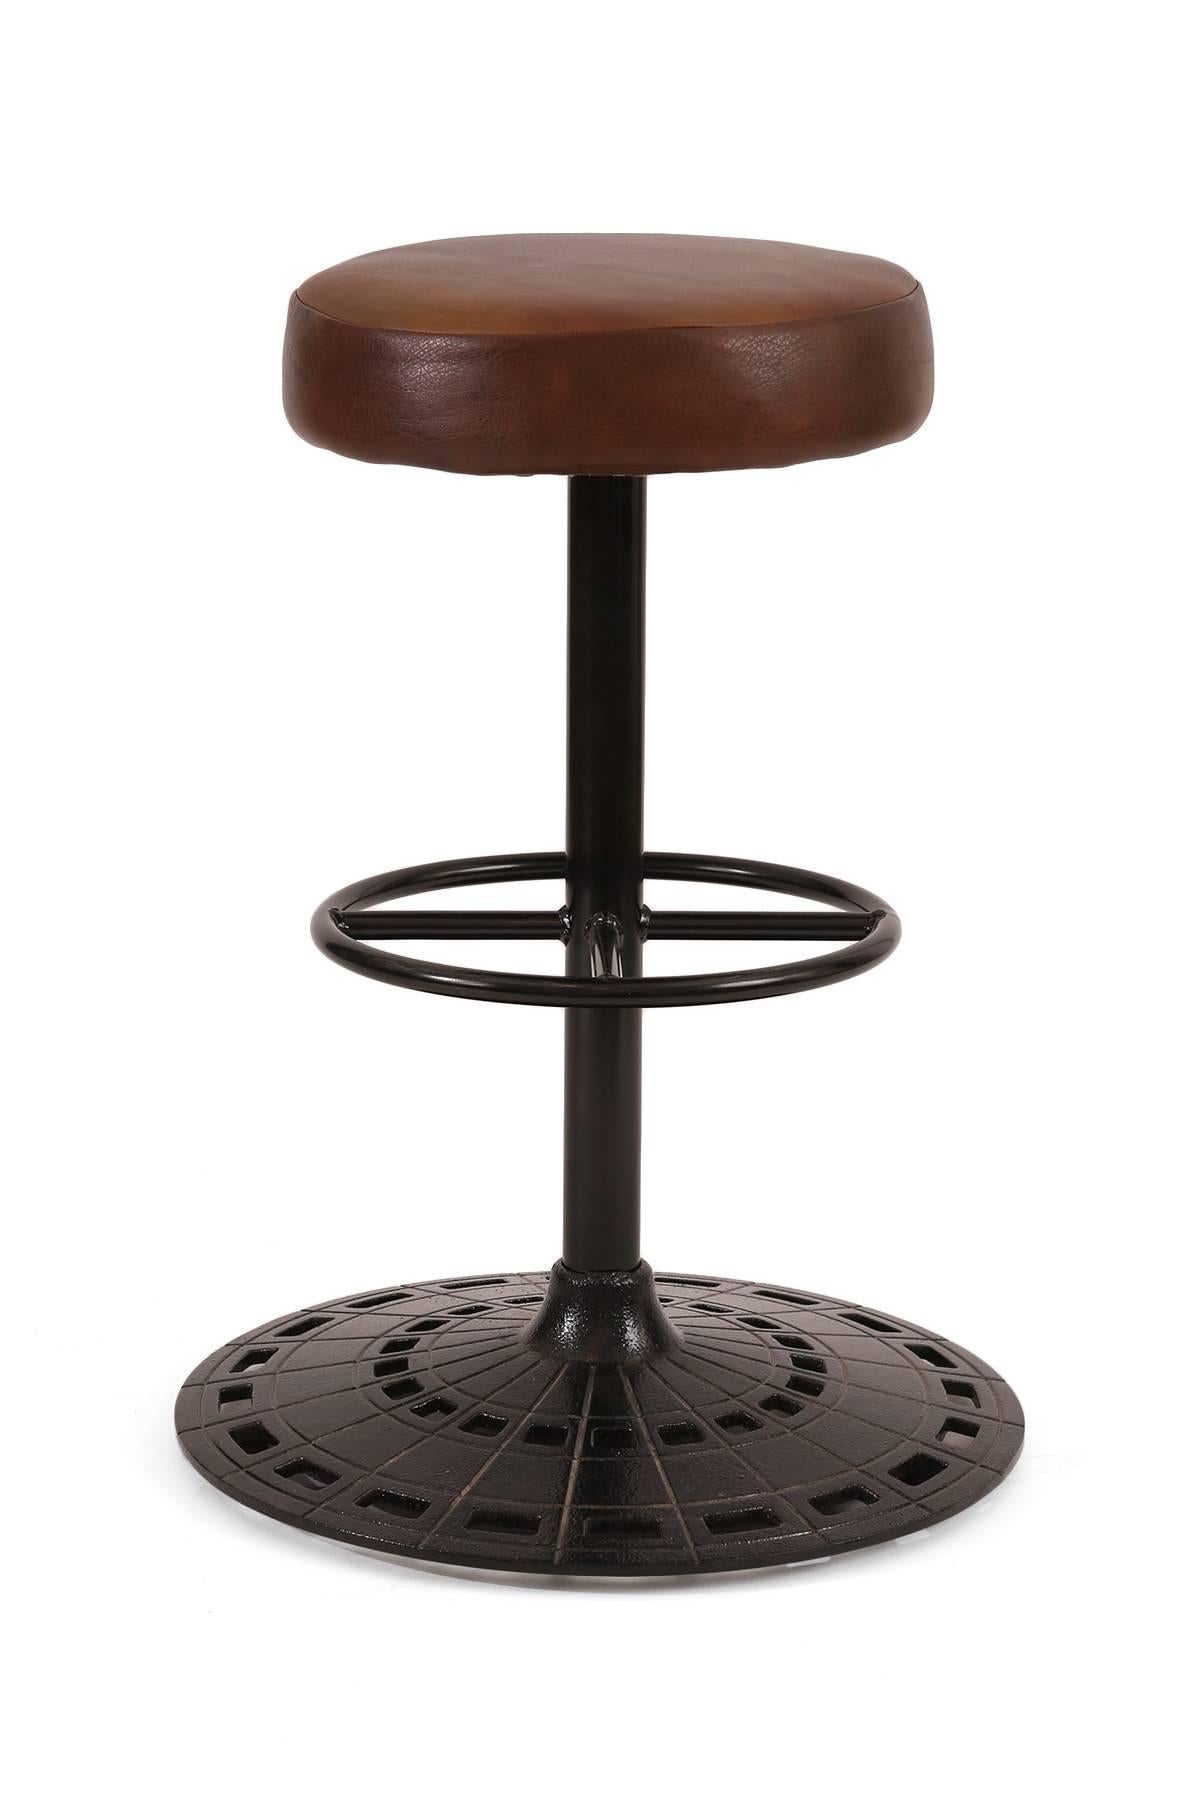 Six leather and cast iron swivel bar stools circa mid-1970s. These examples have perforated stout iron bases that have been newly powder coated. The seats are upholstered in a buttery tobacco leather. These can be sold individually or as a set.